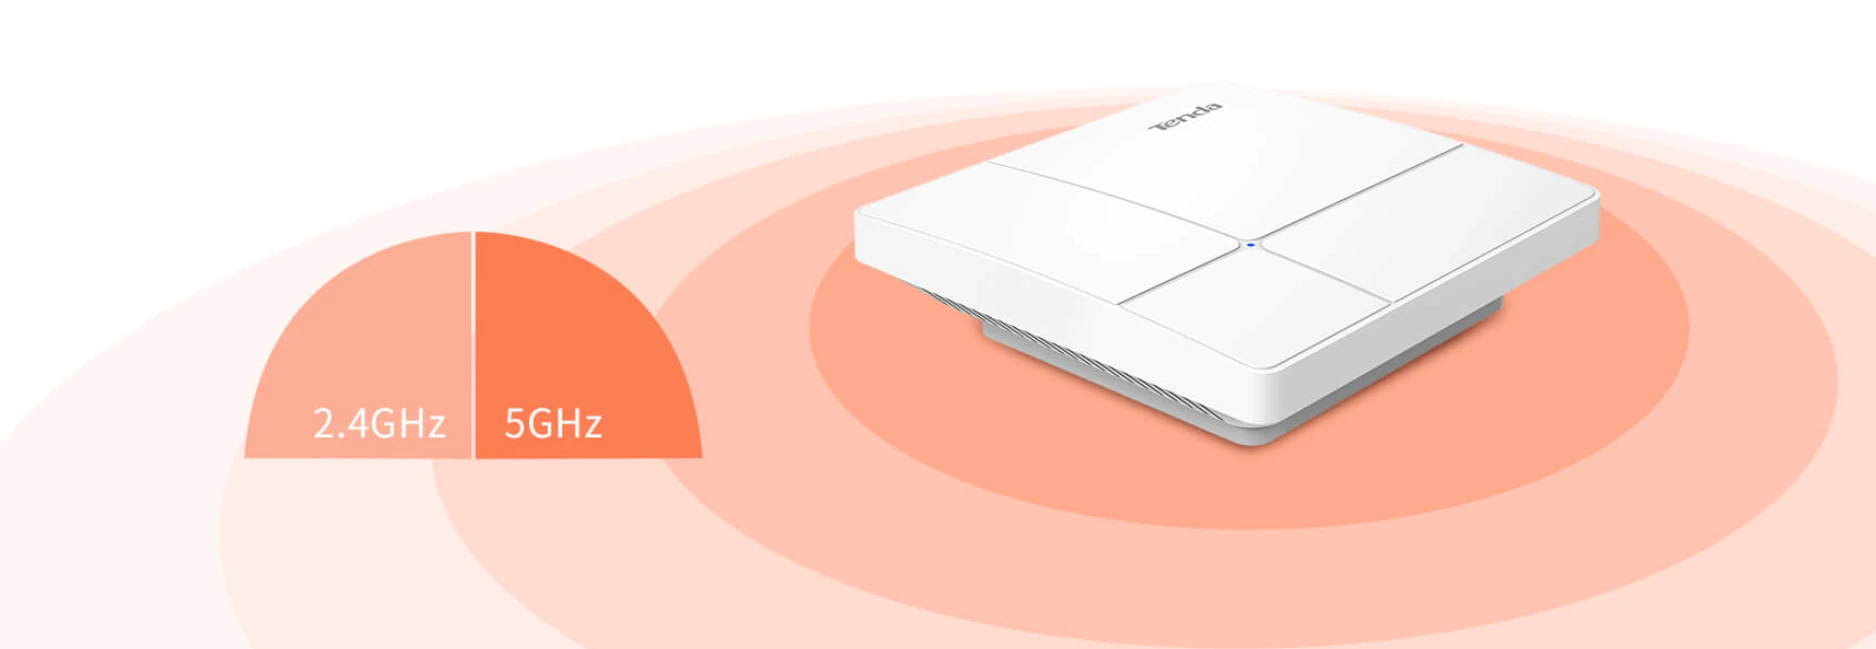 Acces Point Indoor Wireless Tenda i25 1200MBPS Dual Band, Frecventa 2.4 + 5 GHz, Alb